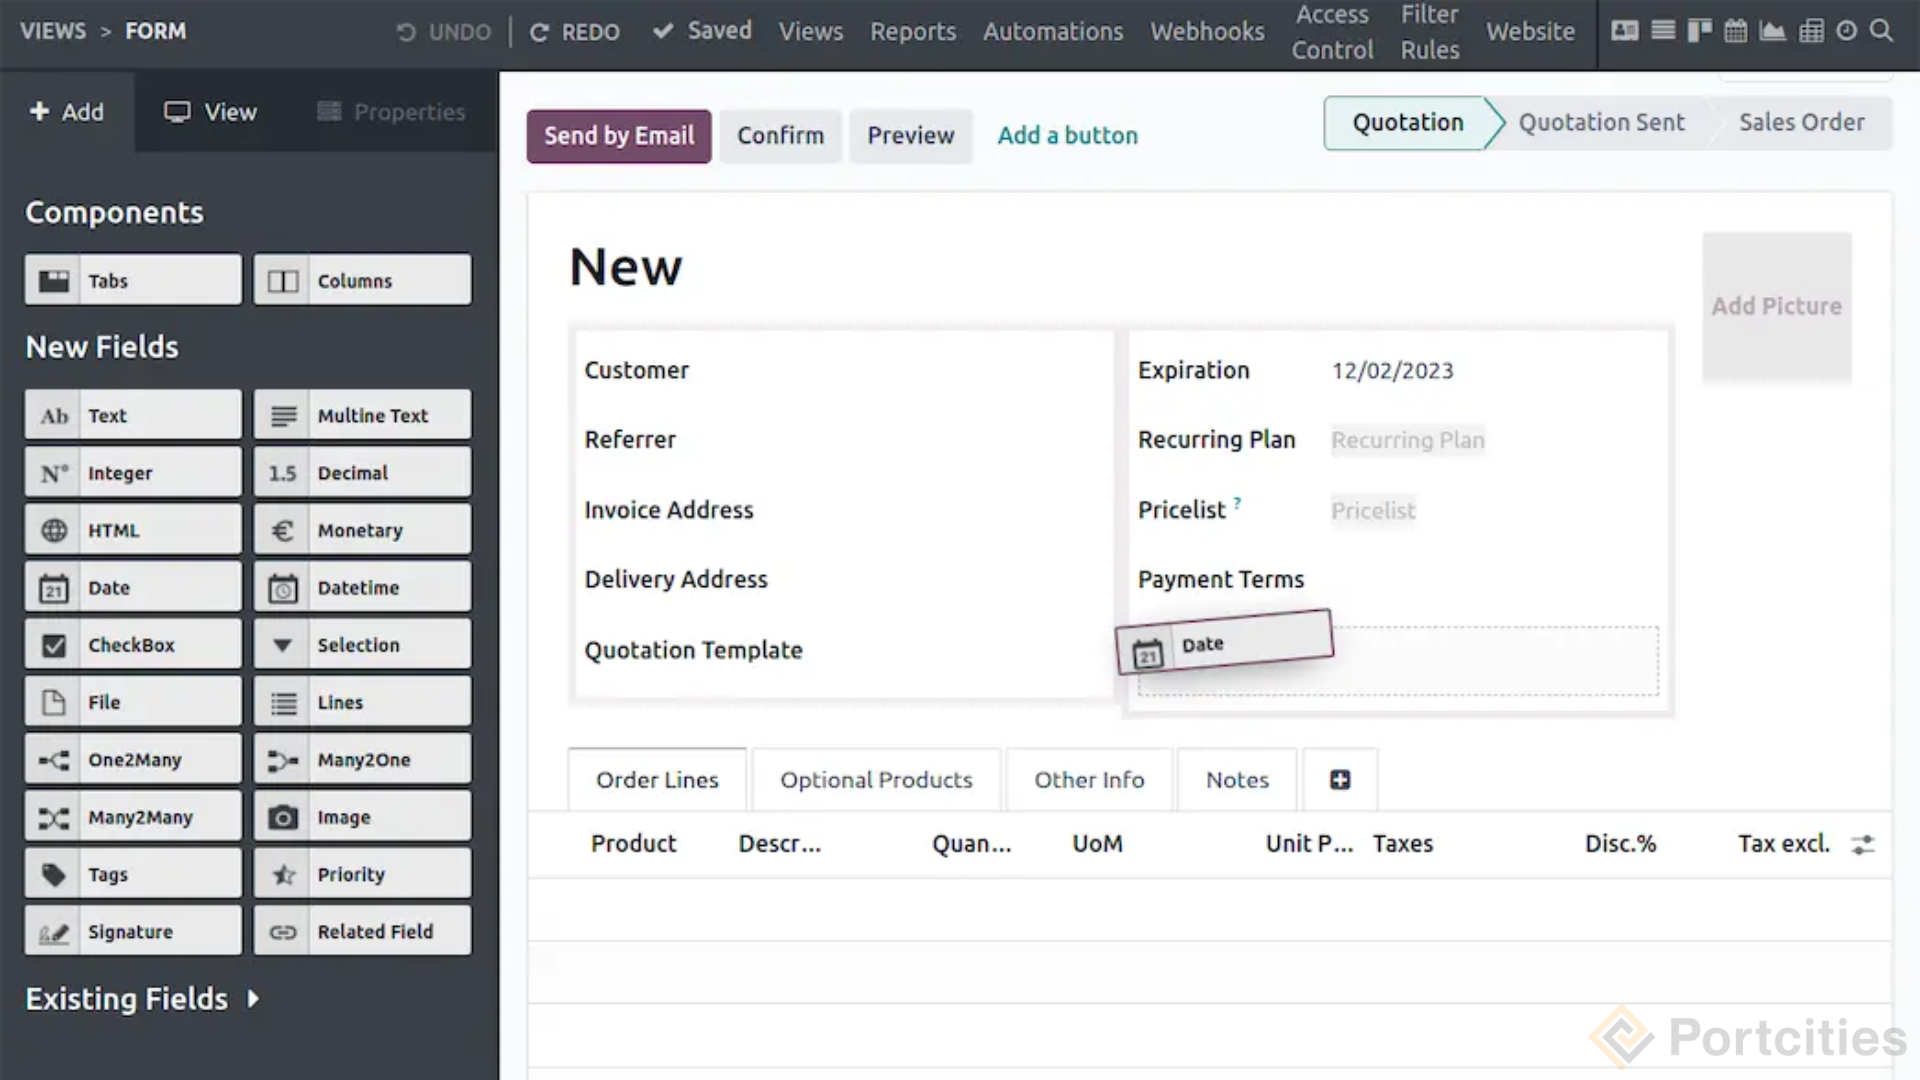 11. portcities.net/blog/erp-and-odoo-insights-2/what-is-odoo-and-how-it-can-help-your-company-grow-147 (Subscriptions in Odoo 17)